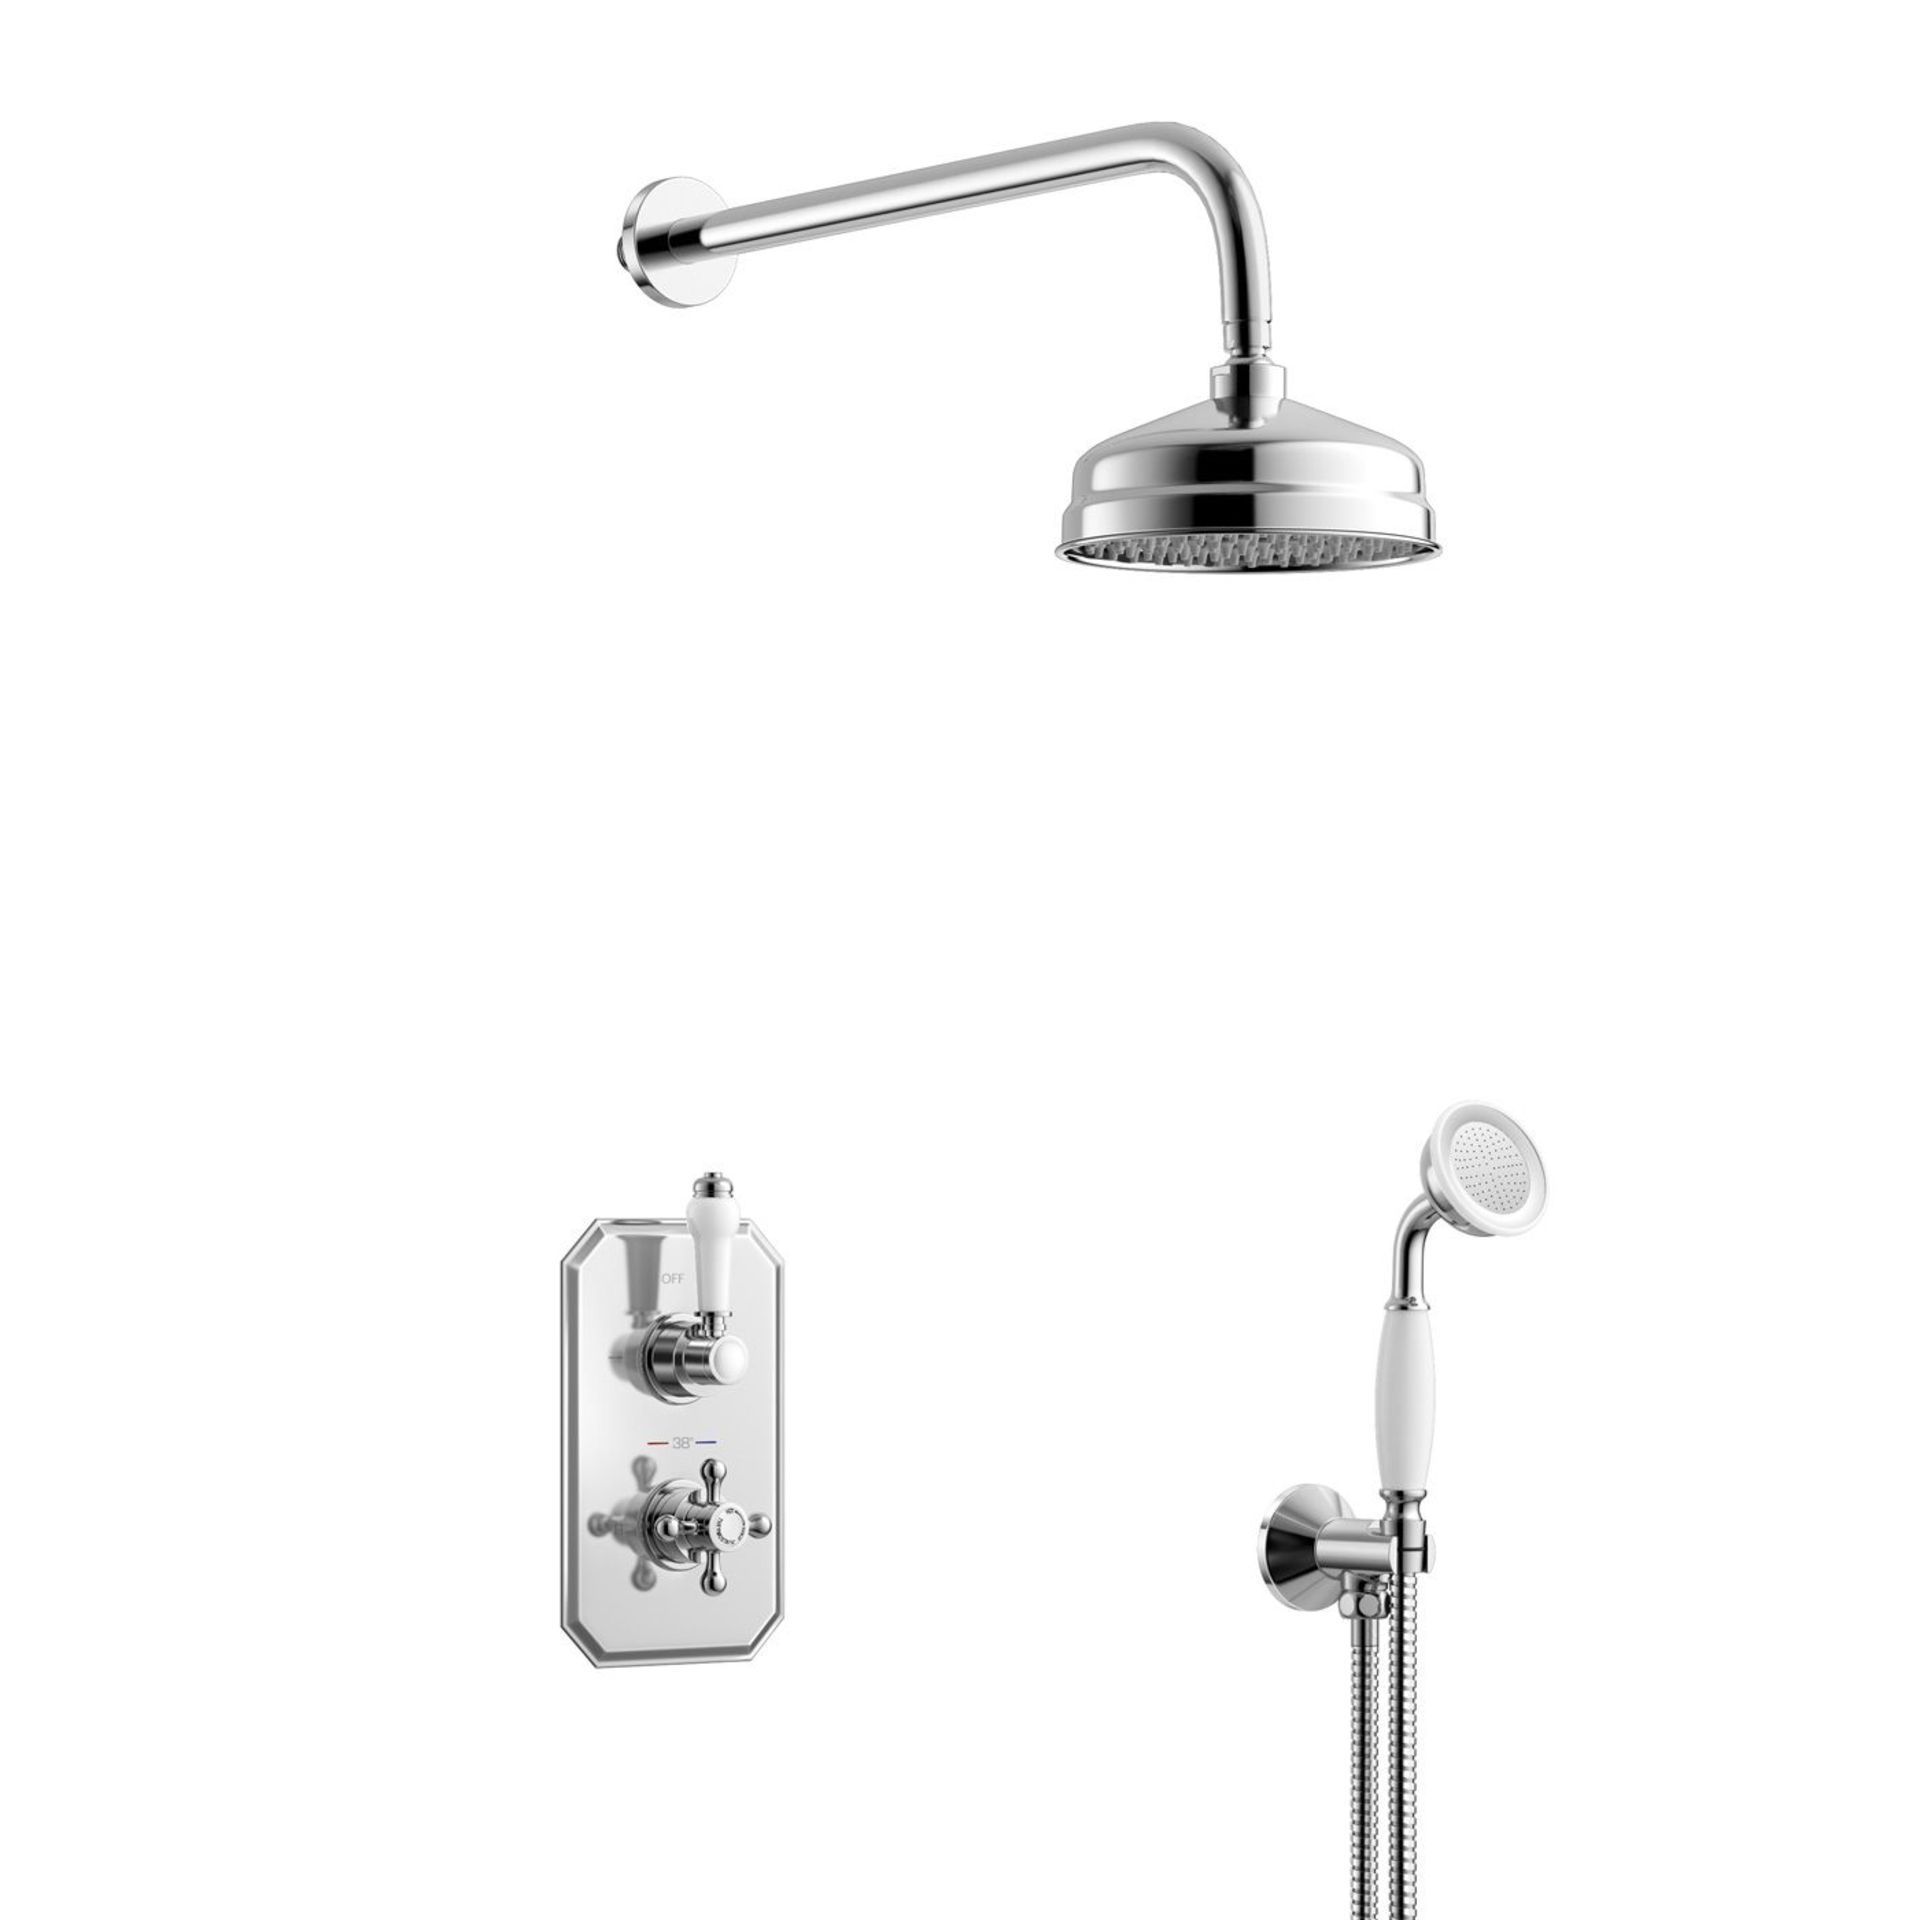 New & Boxed 150 mm Traditional Stainless Steel Wall Mounted Head, Rail Kit. RRP £511.99.Ss2Wct - Image 2 of 3